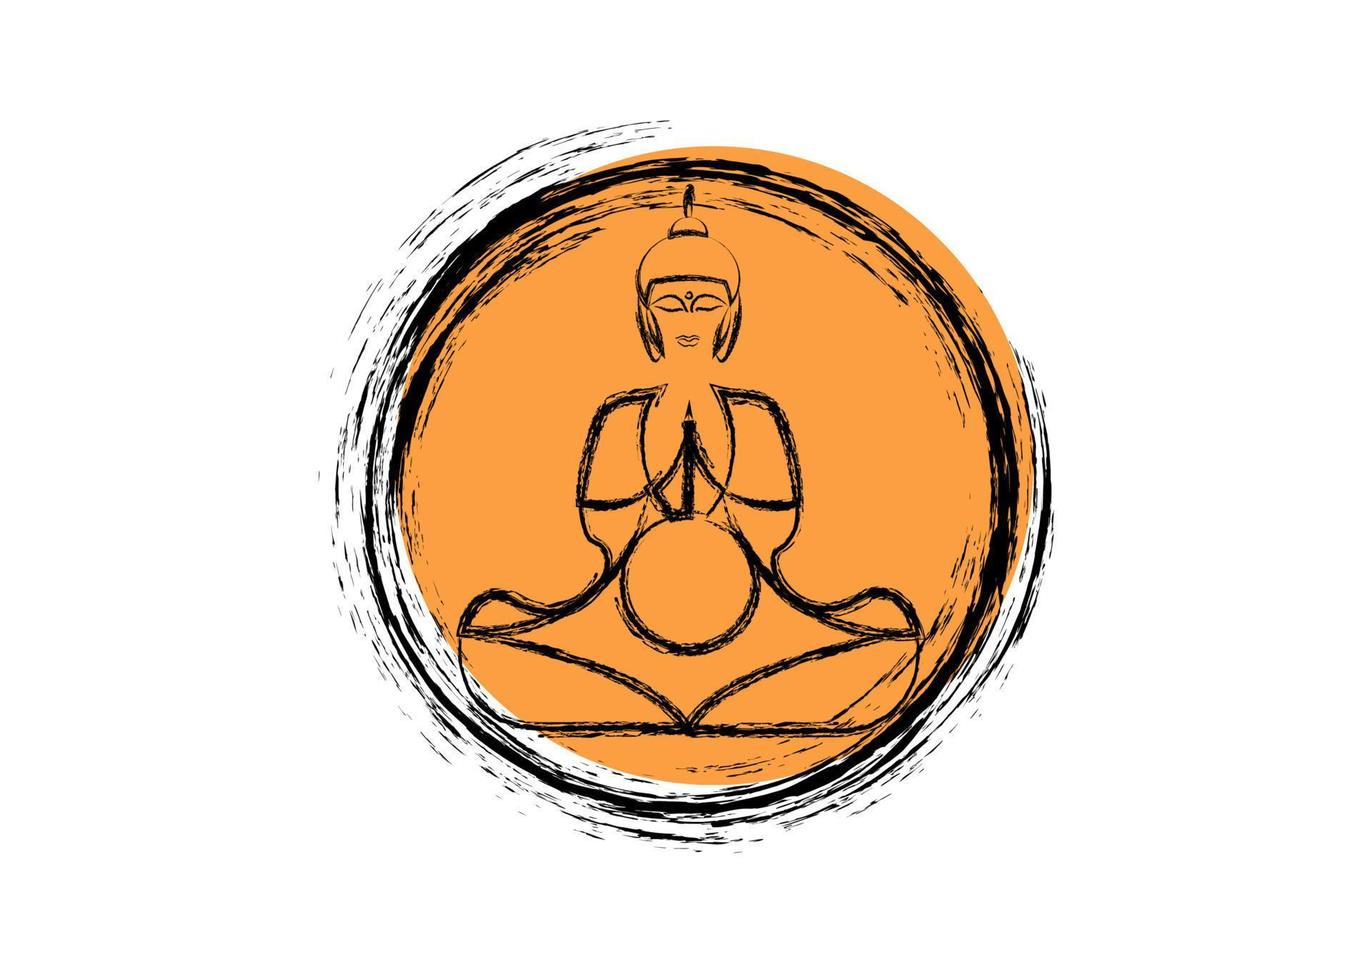 Buddha in meditation, Orange Enso Zen Circle of Enlightenment, symbol and meditating Buddha silhouette concept, Buddhism, Japan, vector isolated on white background in paint brush style